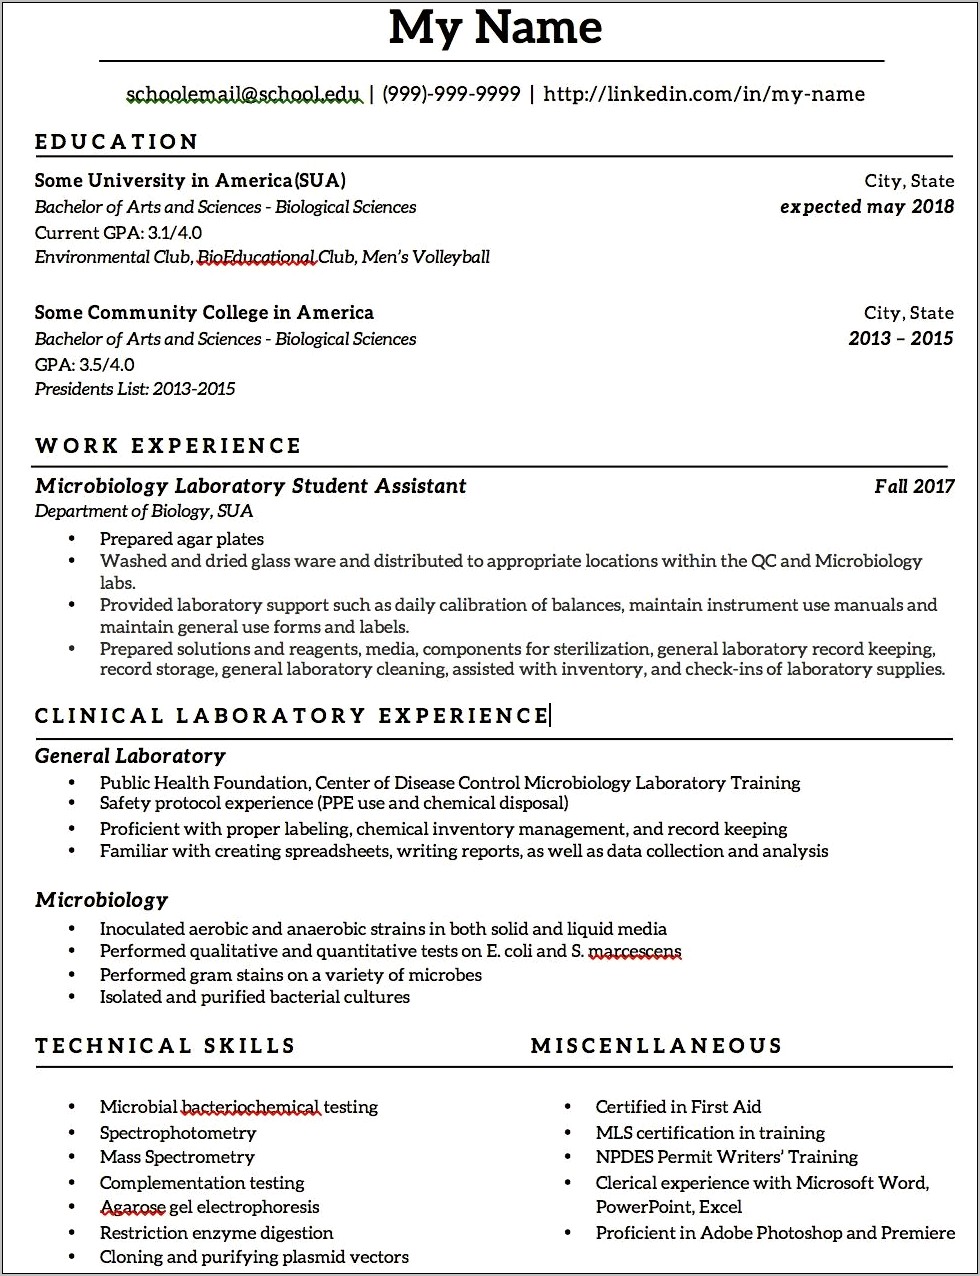 Cover Letter For Resume For Lab Technician